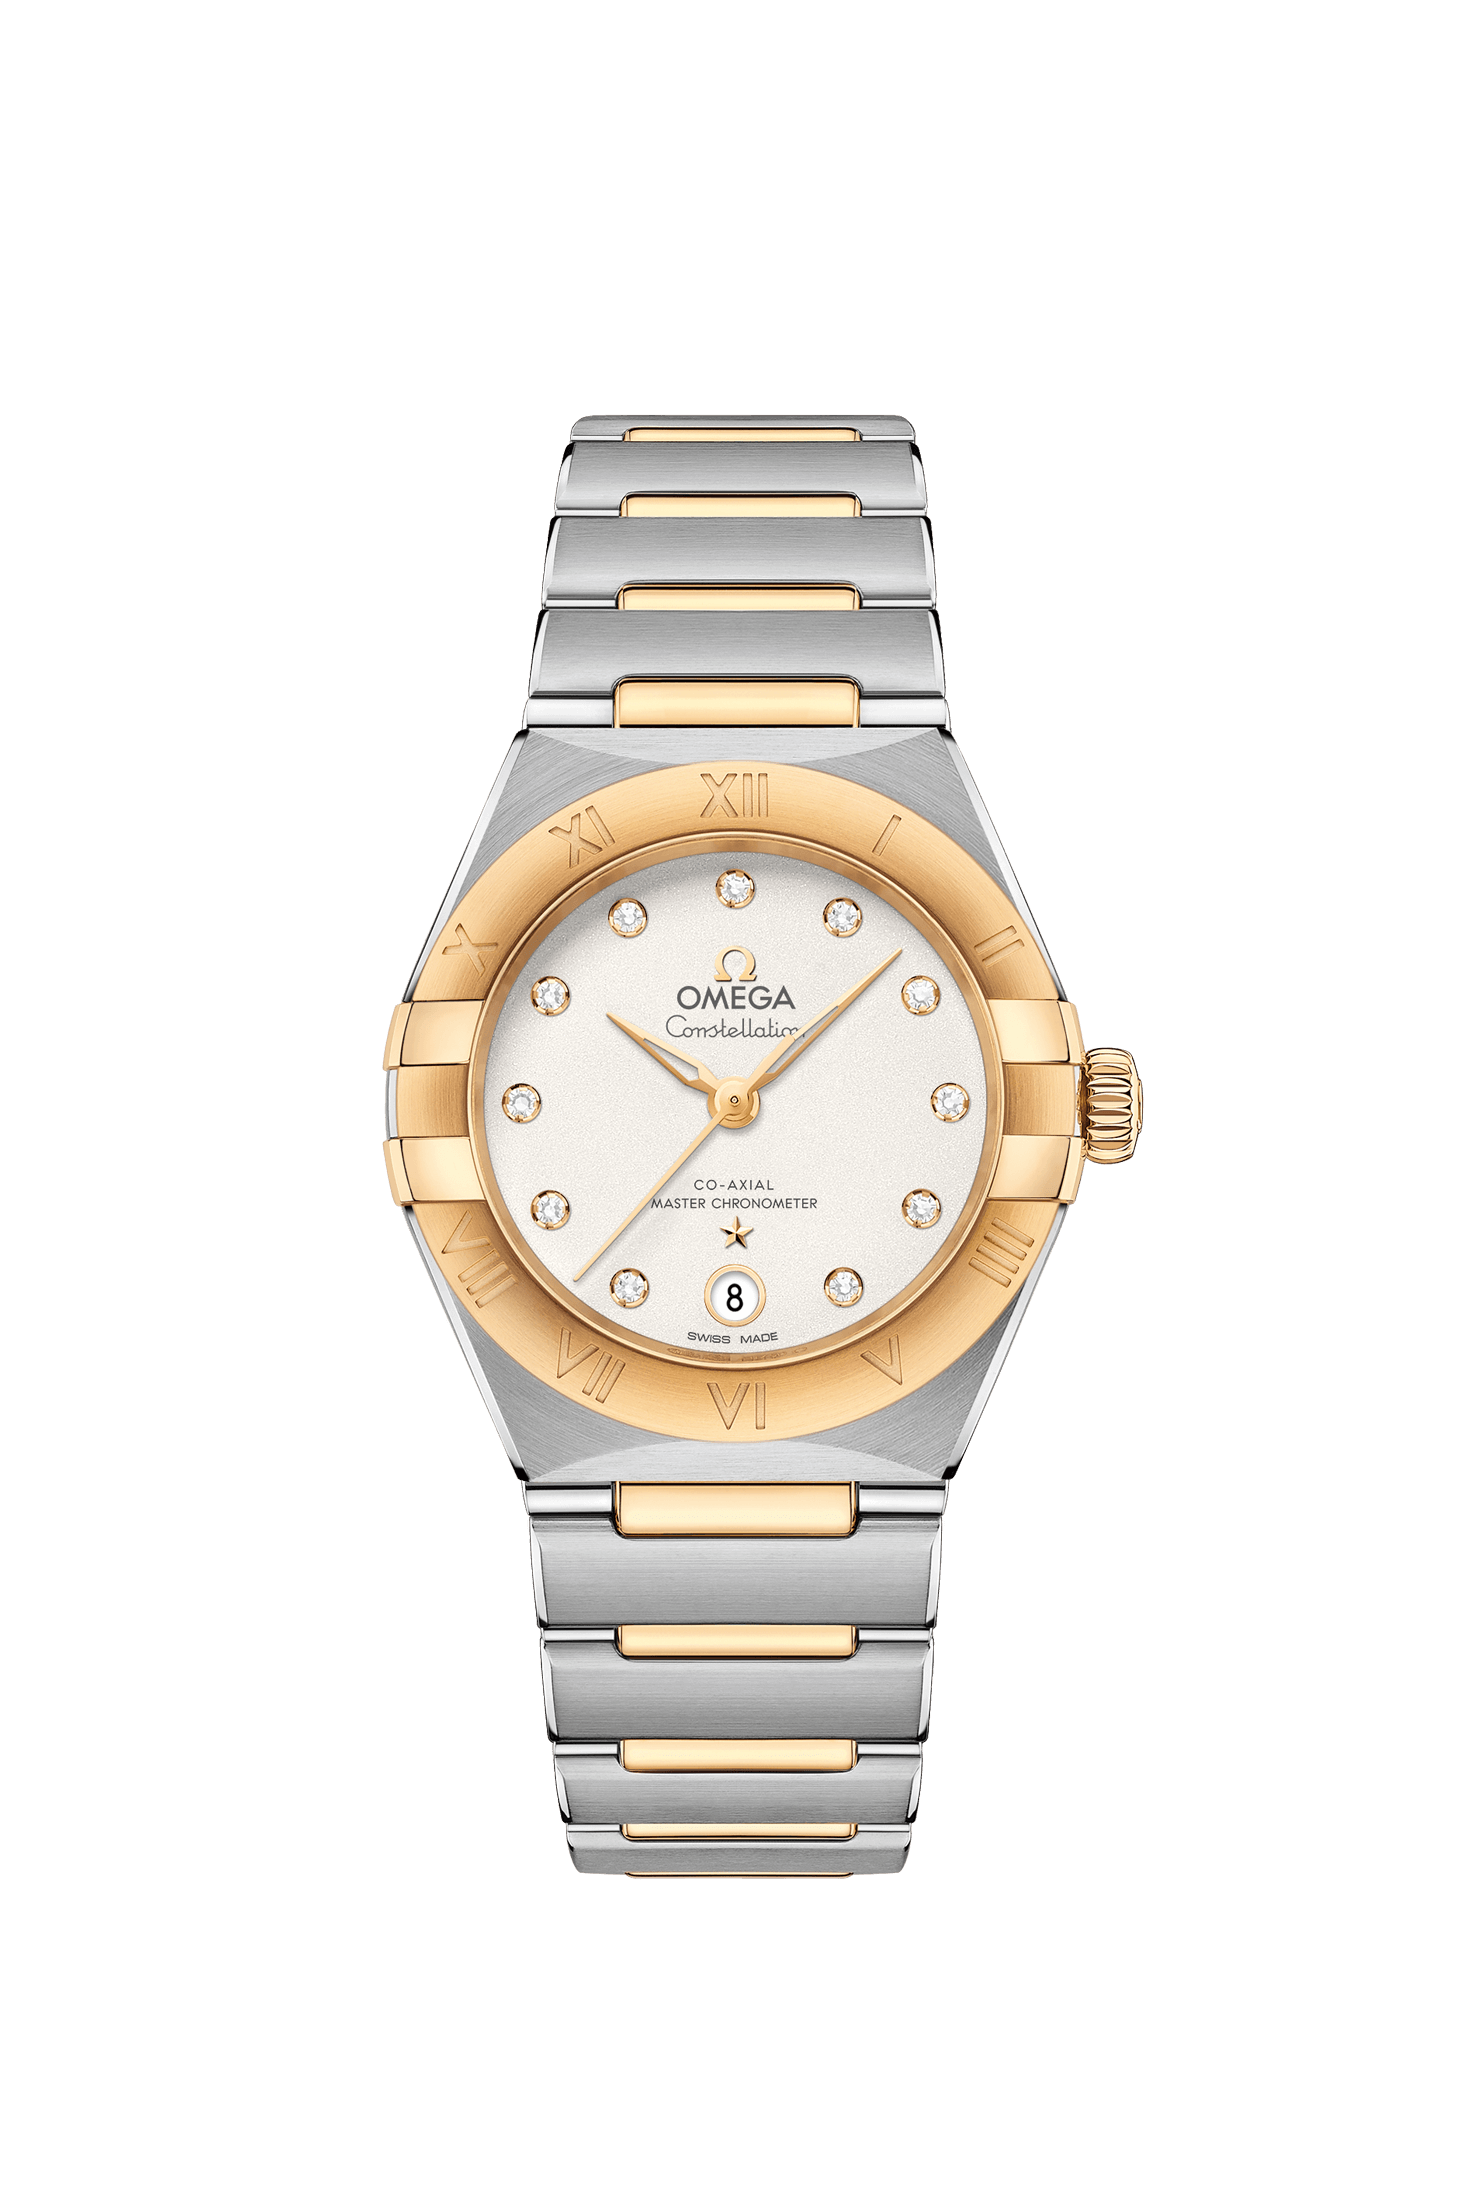 Ladies' watch  OMEGA, Constellation Co Axial Master Chronometer / 29mm, SKU: 131.20.29.20.52.002 | watchapproach.com